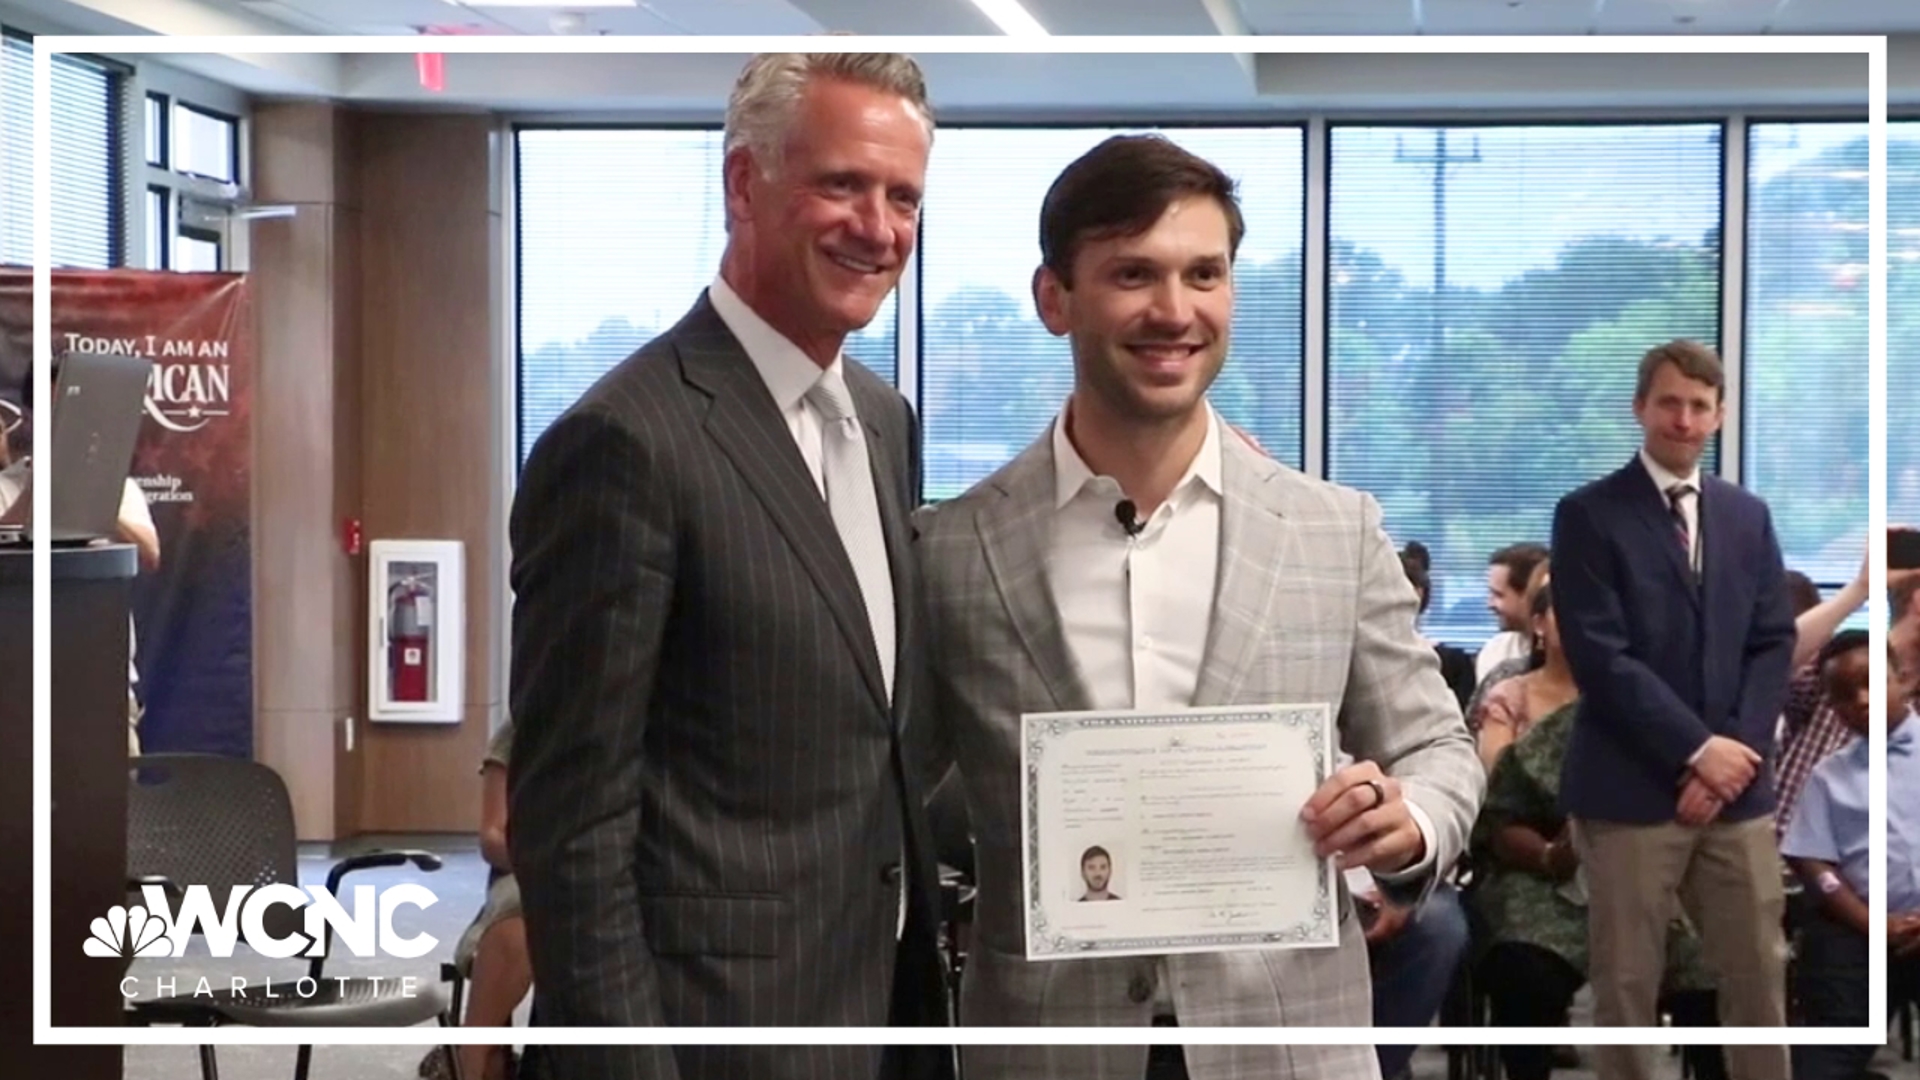 The Trackhouse Racing driver was one of 48 people who became U.S. citizens in Charlotte on Tuesday.